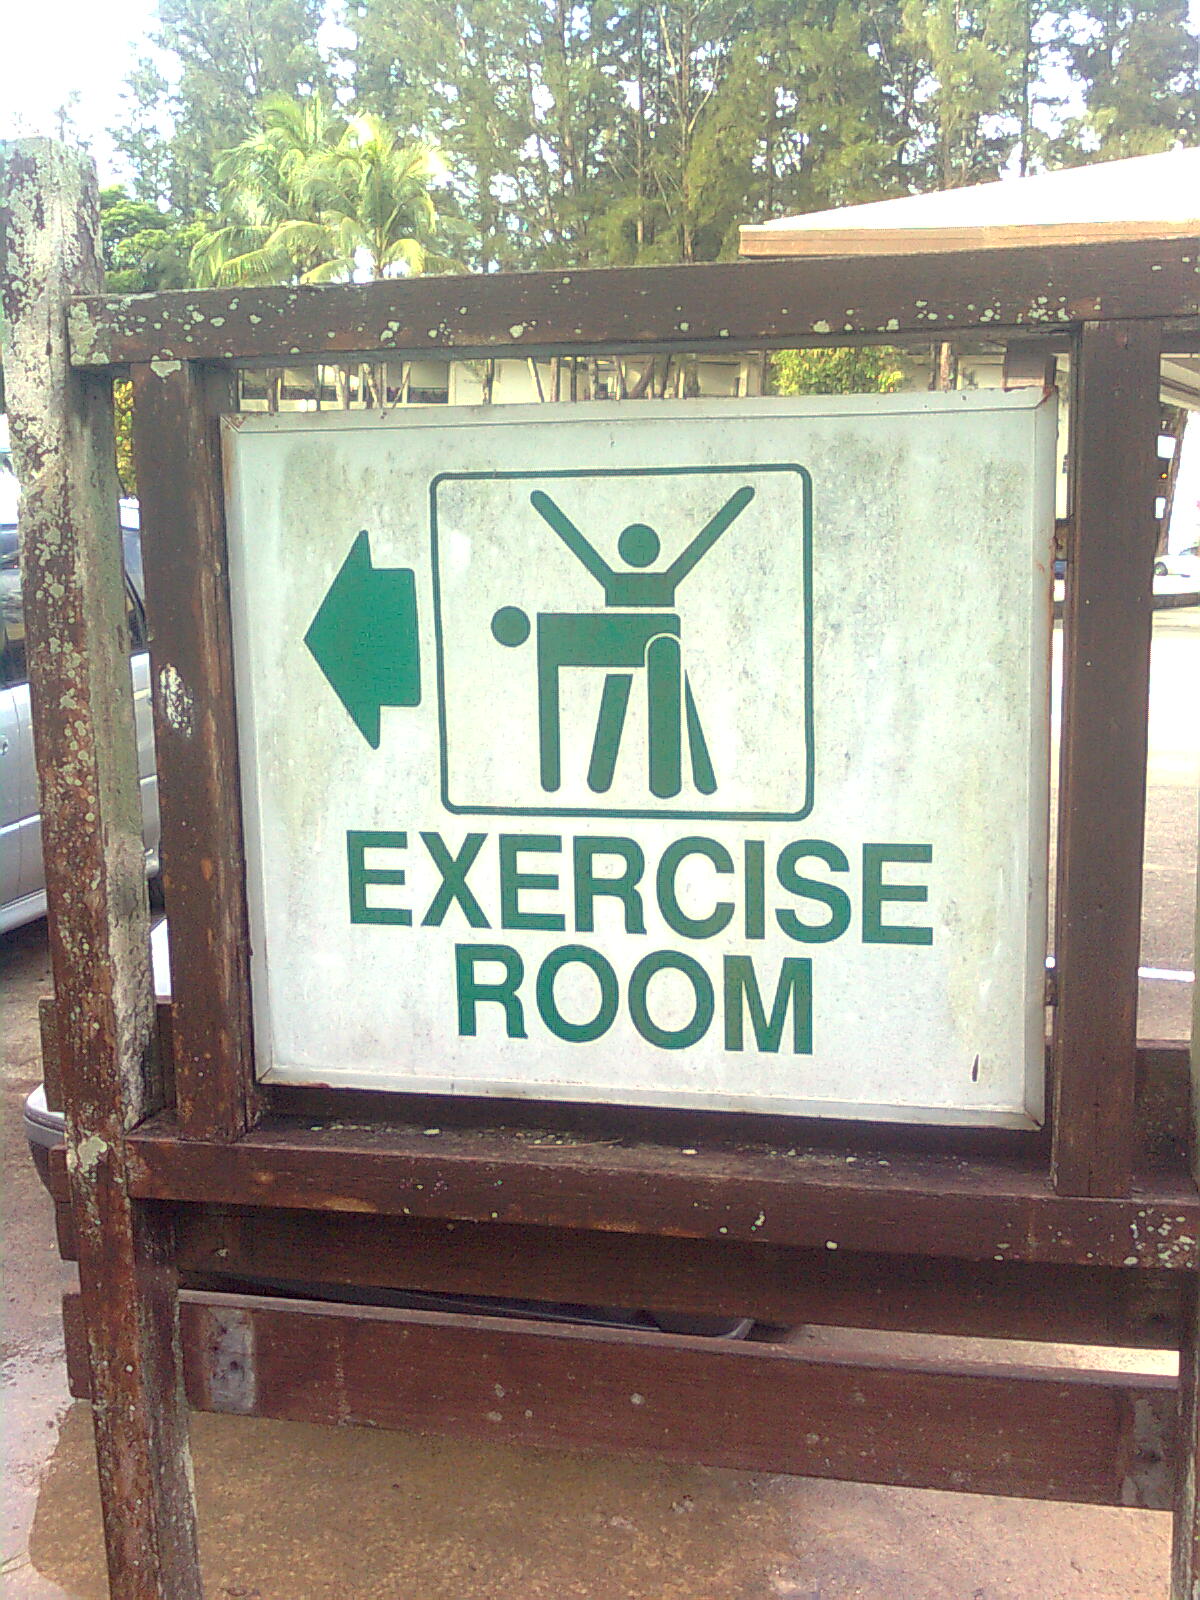 "excercise"